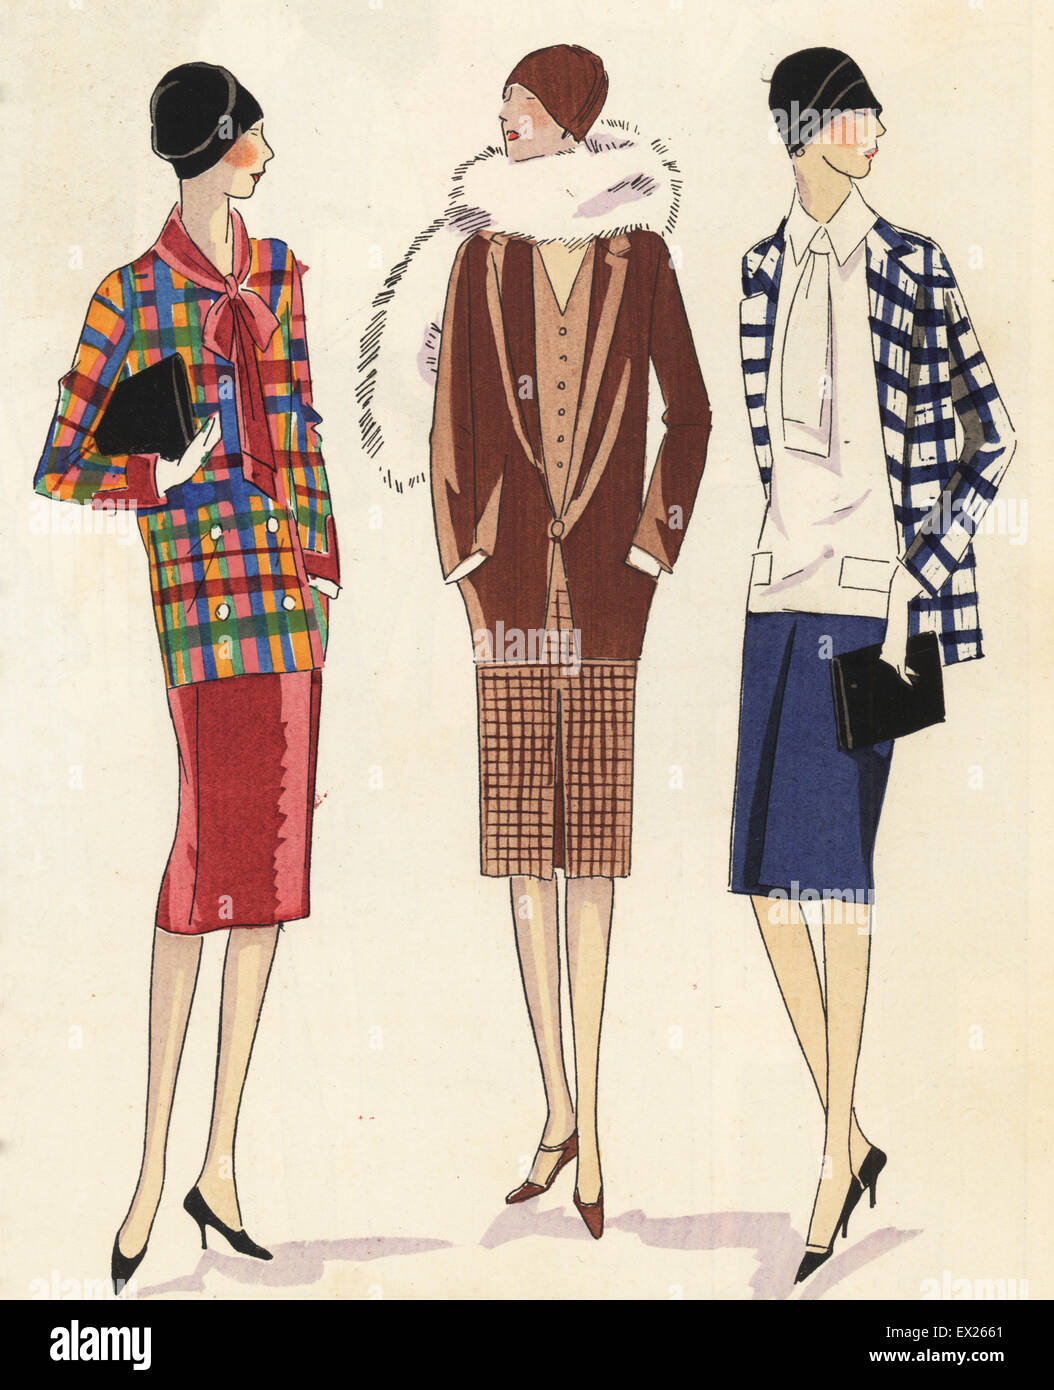 Woman in sports jacket of tartan taffeta and velvet skirt, woman in suit of chestnut and check linen, and woman in sports ensemble of blue and check linen. Lithograph with pochoir (stencil) handcolour from the luxury fashion magazine Art, Gout, Beaute, Paris, 1927. Stock Photo